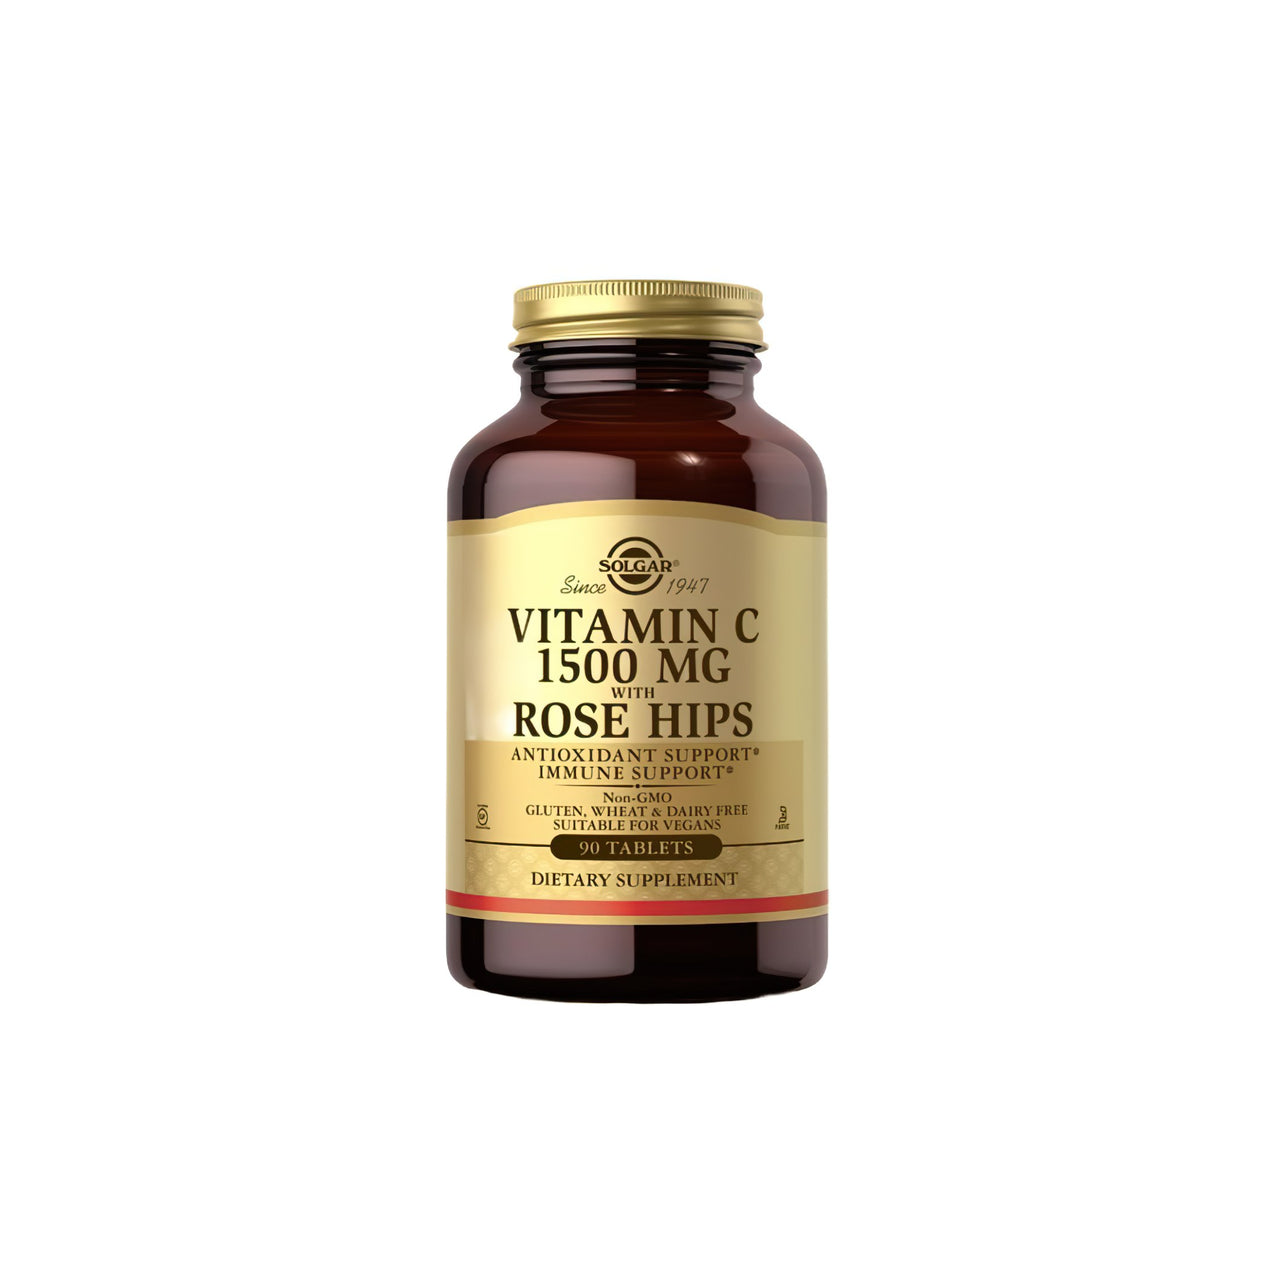 Vitamin C 1500 mg with Rose Hips 90 Tablets - front